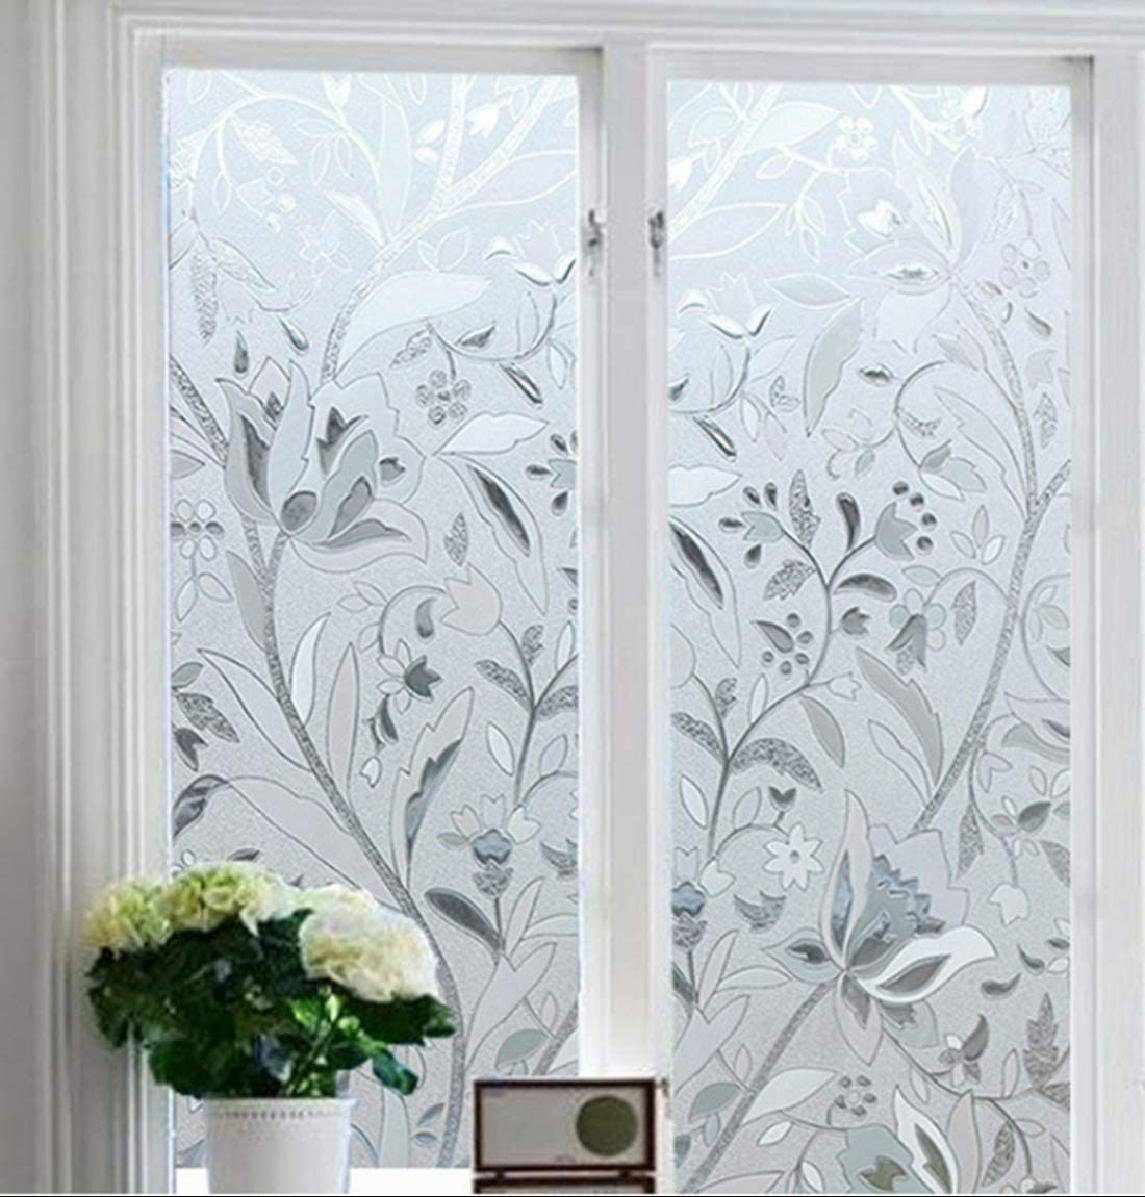 WHITE FLOWER FROSTED PRIVACY GLASS STATIC CLING WINDOW COVERING SELF ADHESIVE 